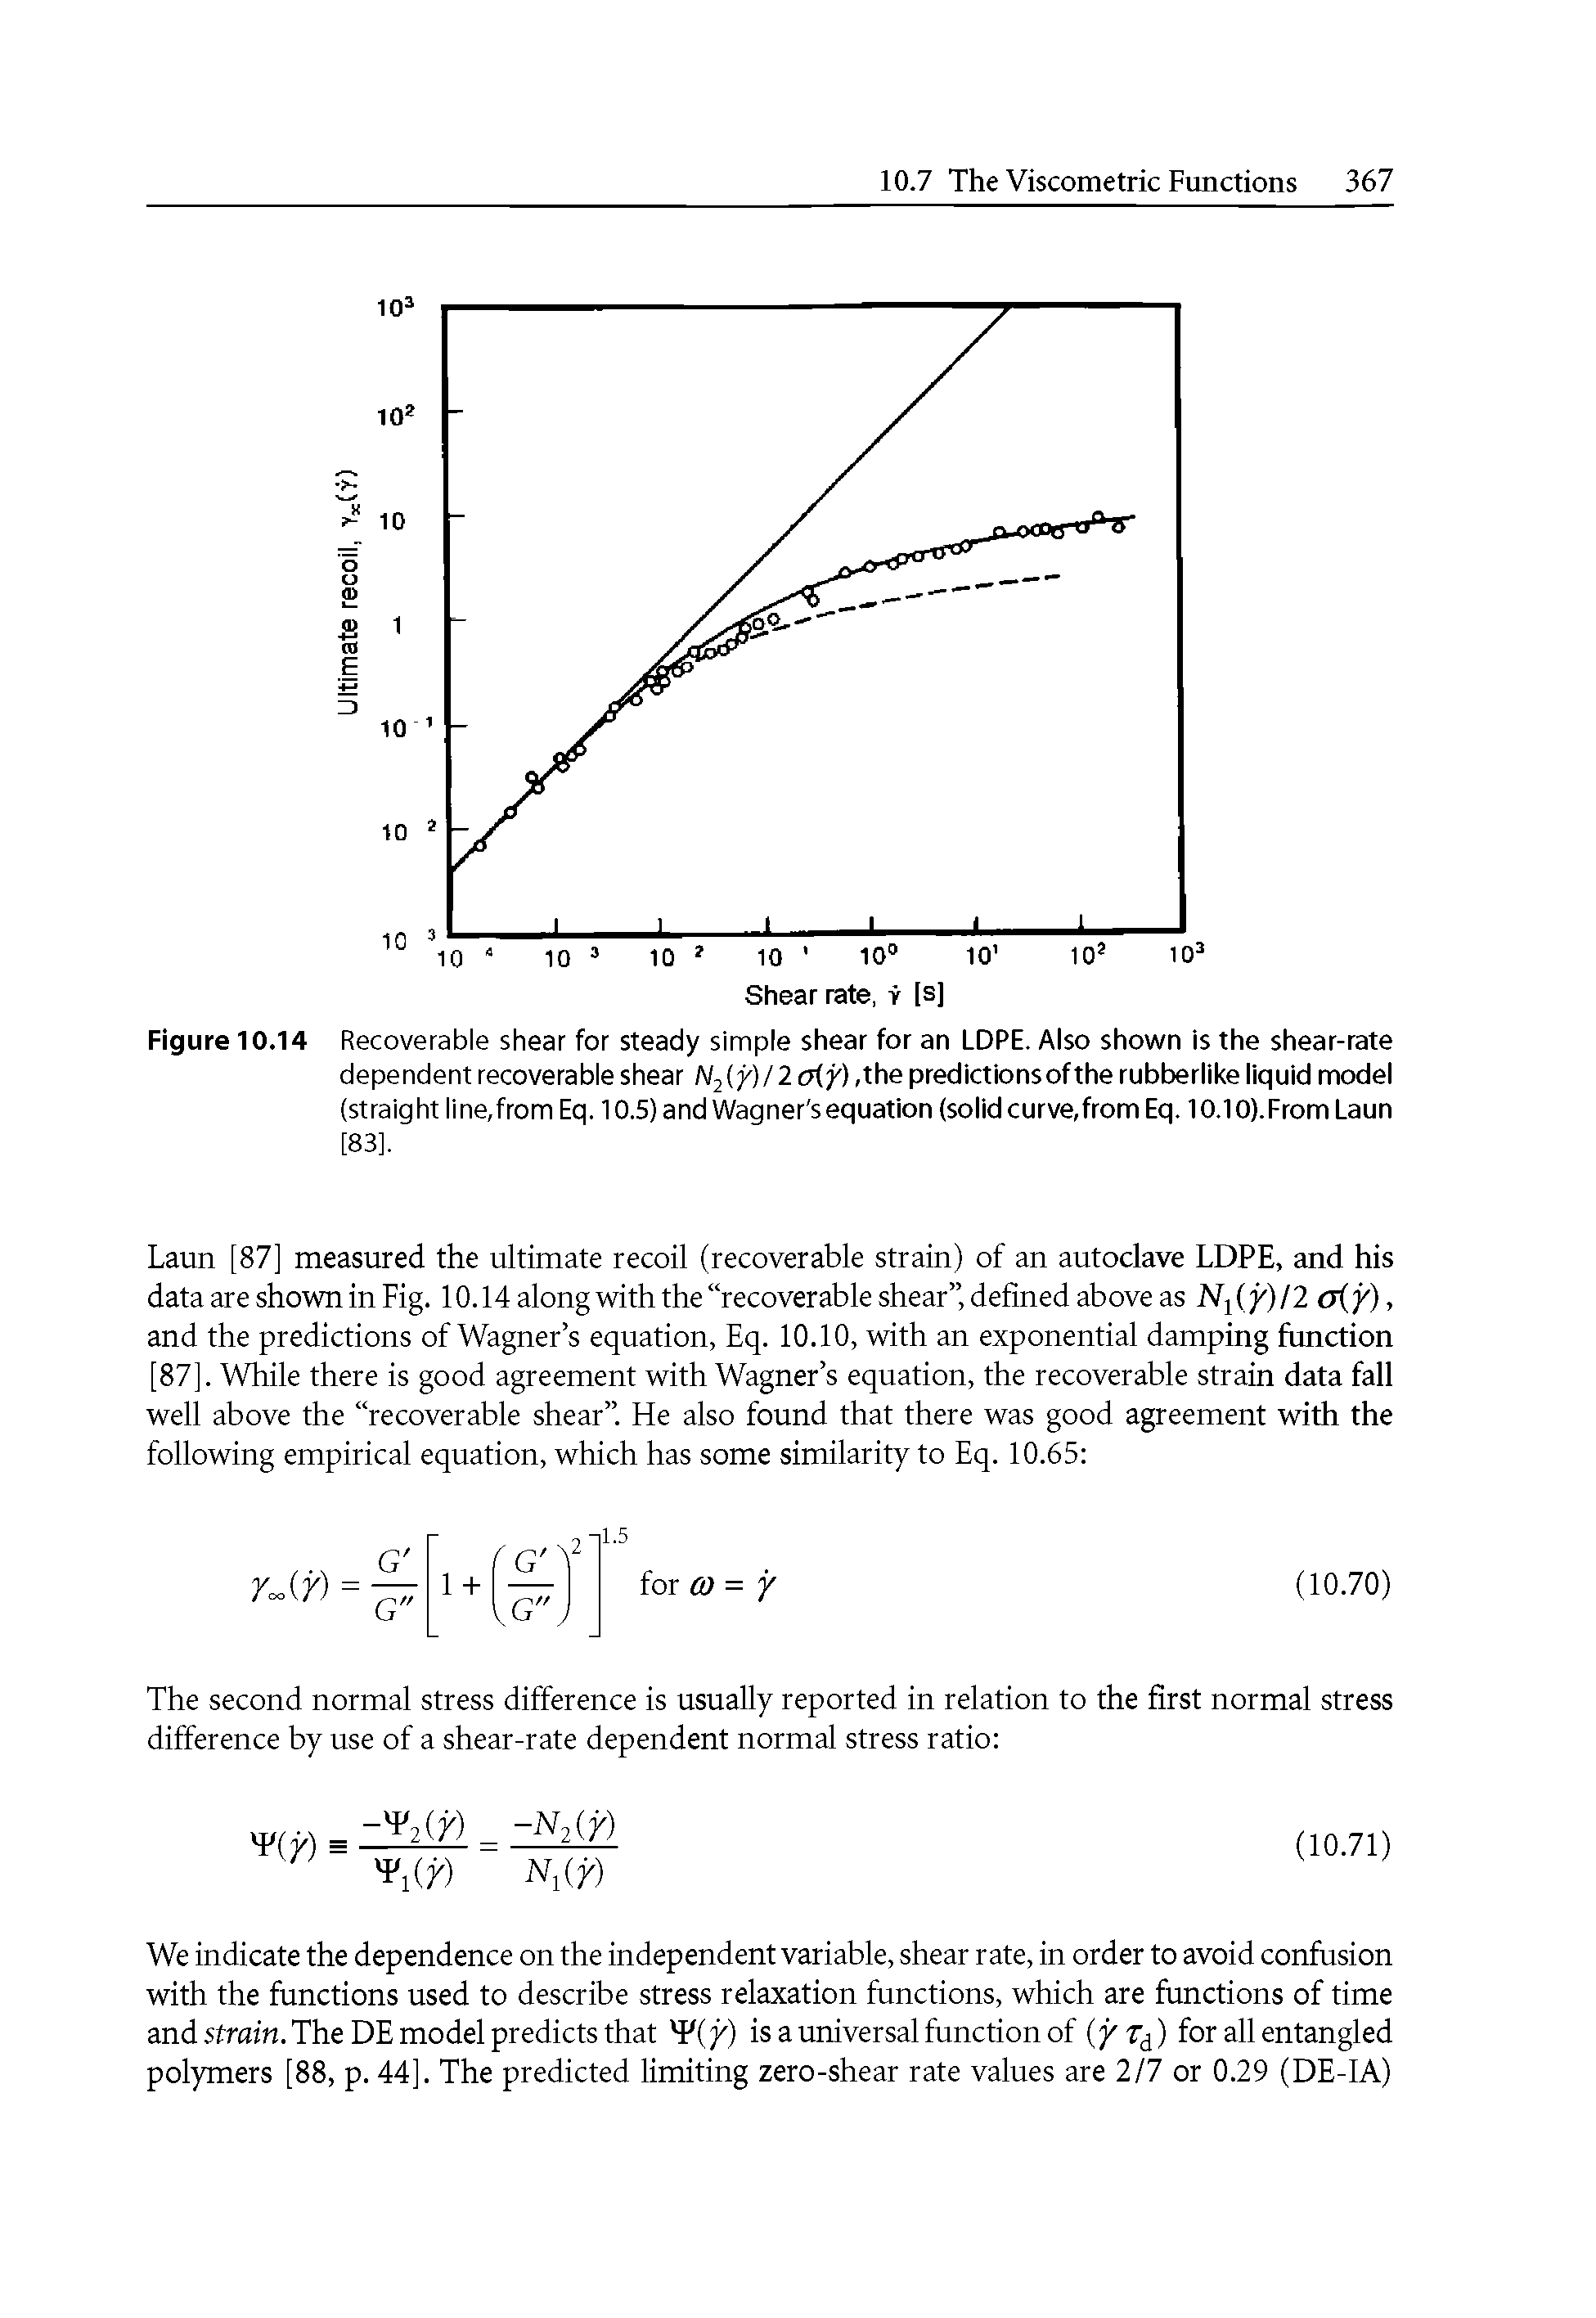 Figure 10.14 Recoverable shear for steady simple shear for an LDPE. Also shown is the shear-rate dependent recoverable shear 2 aiy), the predictions of the rubberlike liquid model (straight line.fromEq. 10.5) and Wagner s equation (solid curve,from Eq. 10.10).FromLaun...